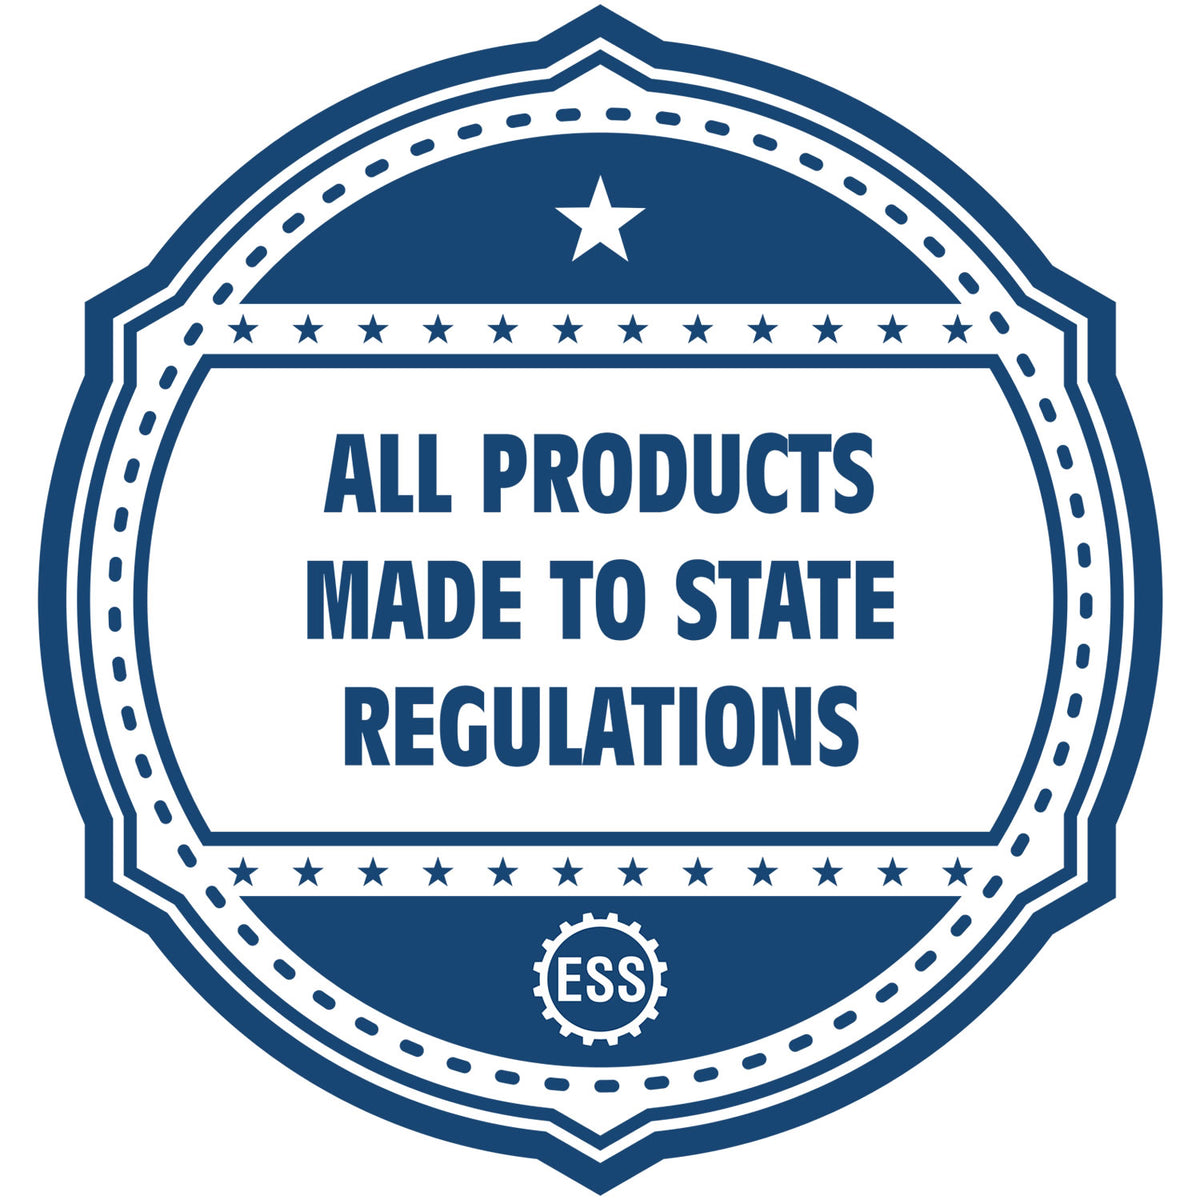 An icon or badge element for the Slim Pre-Inked Maine Architect Seal Stamp showing that this product is made in compliance with state regulations.